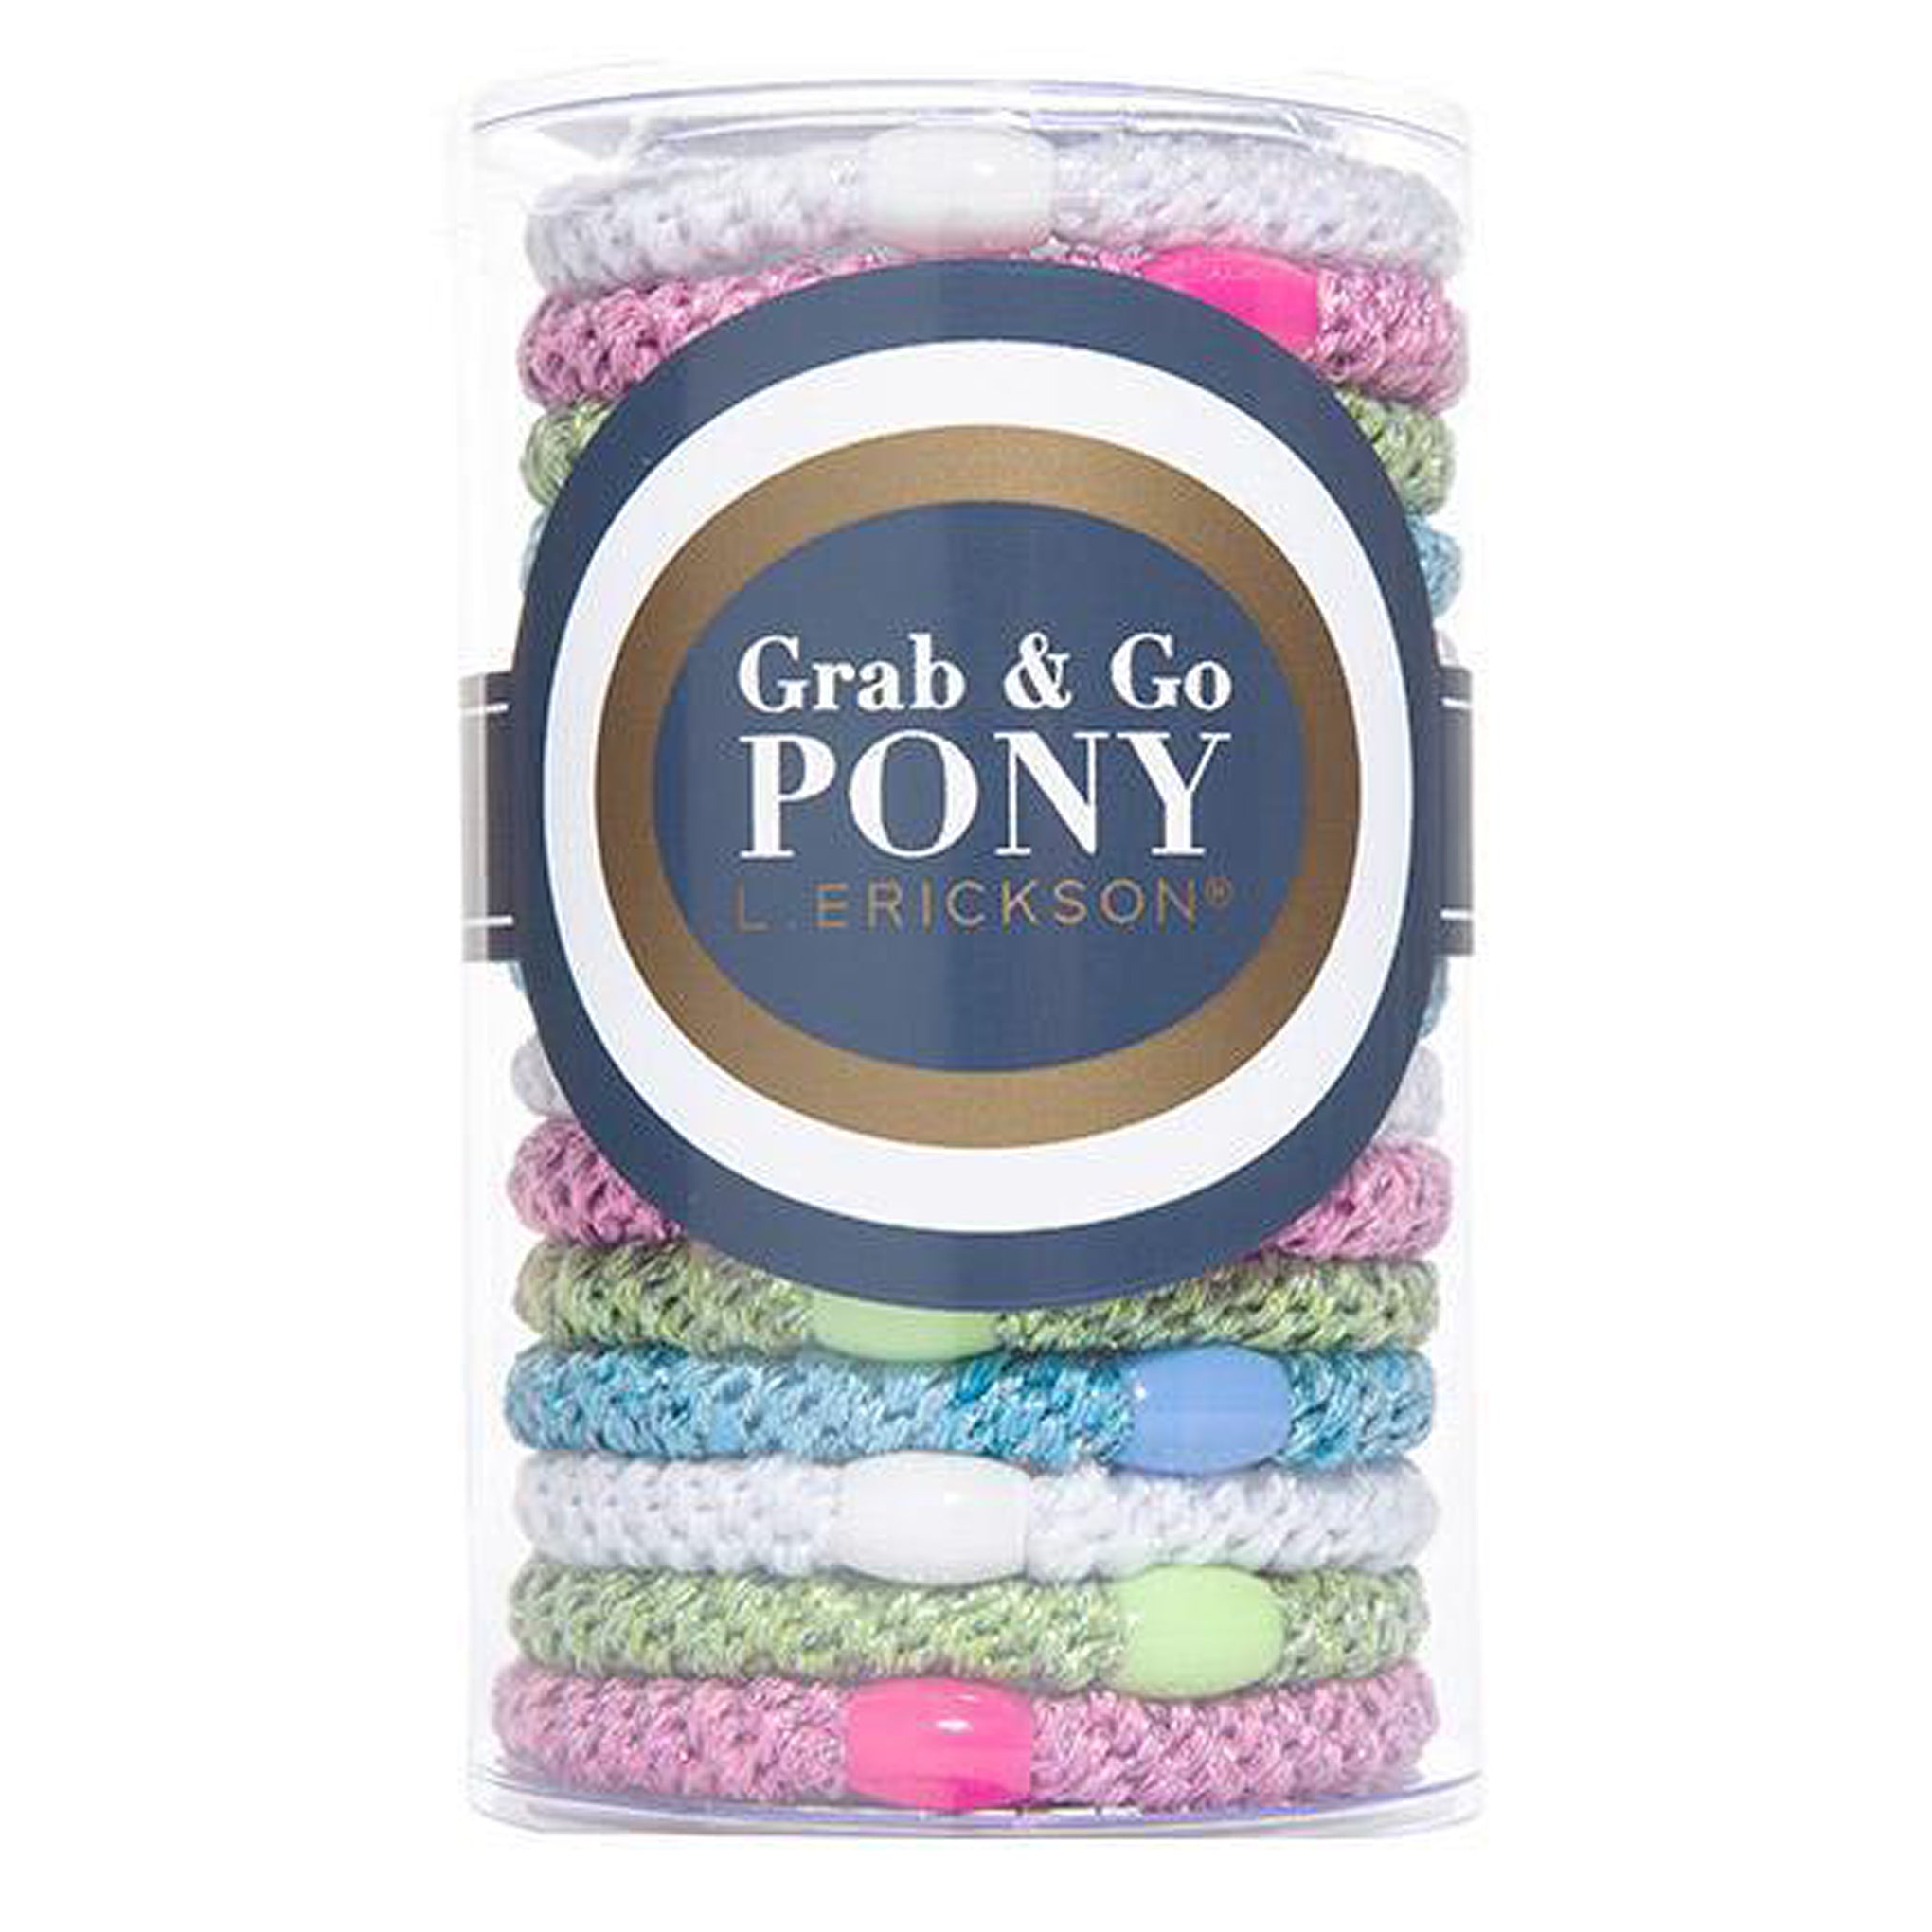 L. Erickson Grab and Go Pony Tube Hair Ties in Dazzle 15 Pack